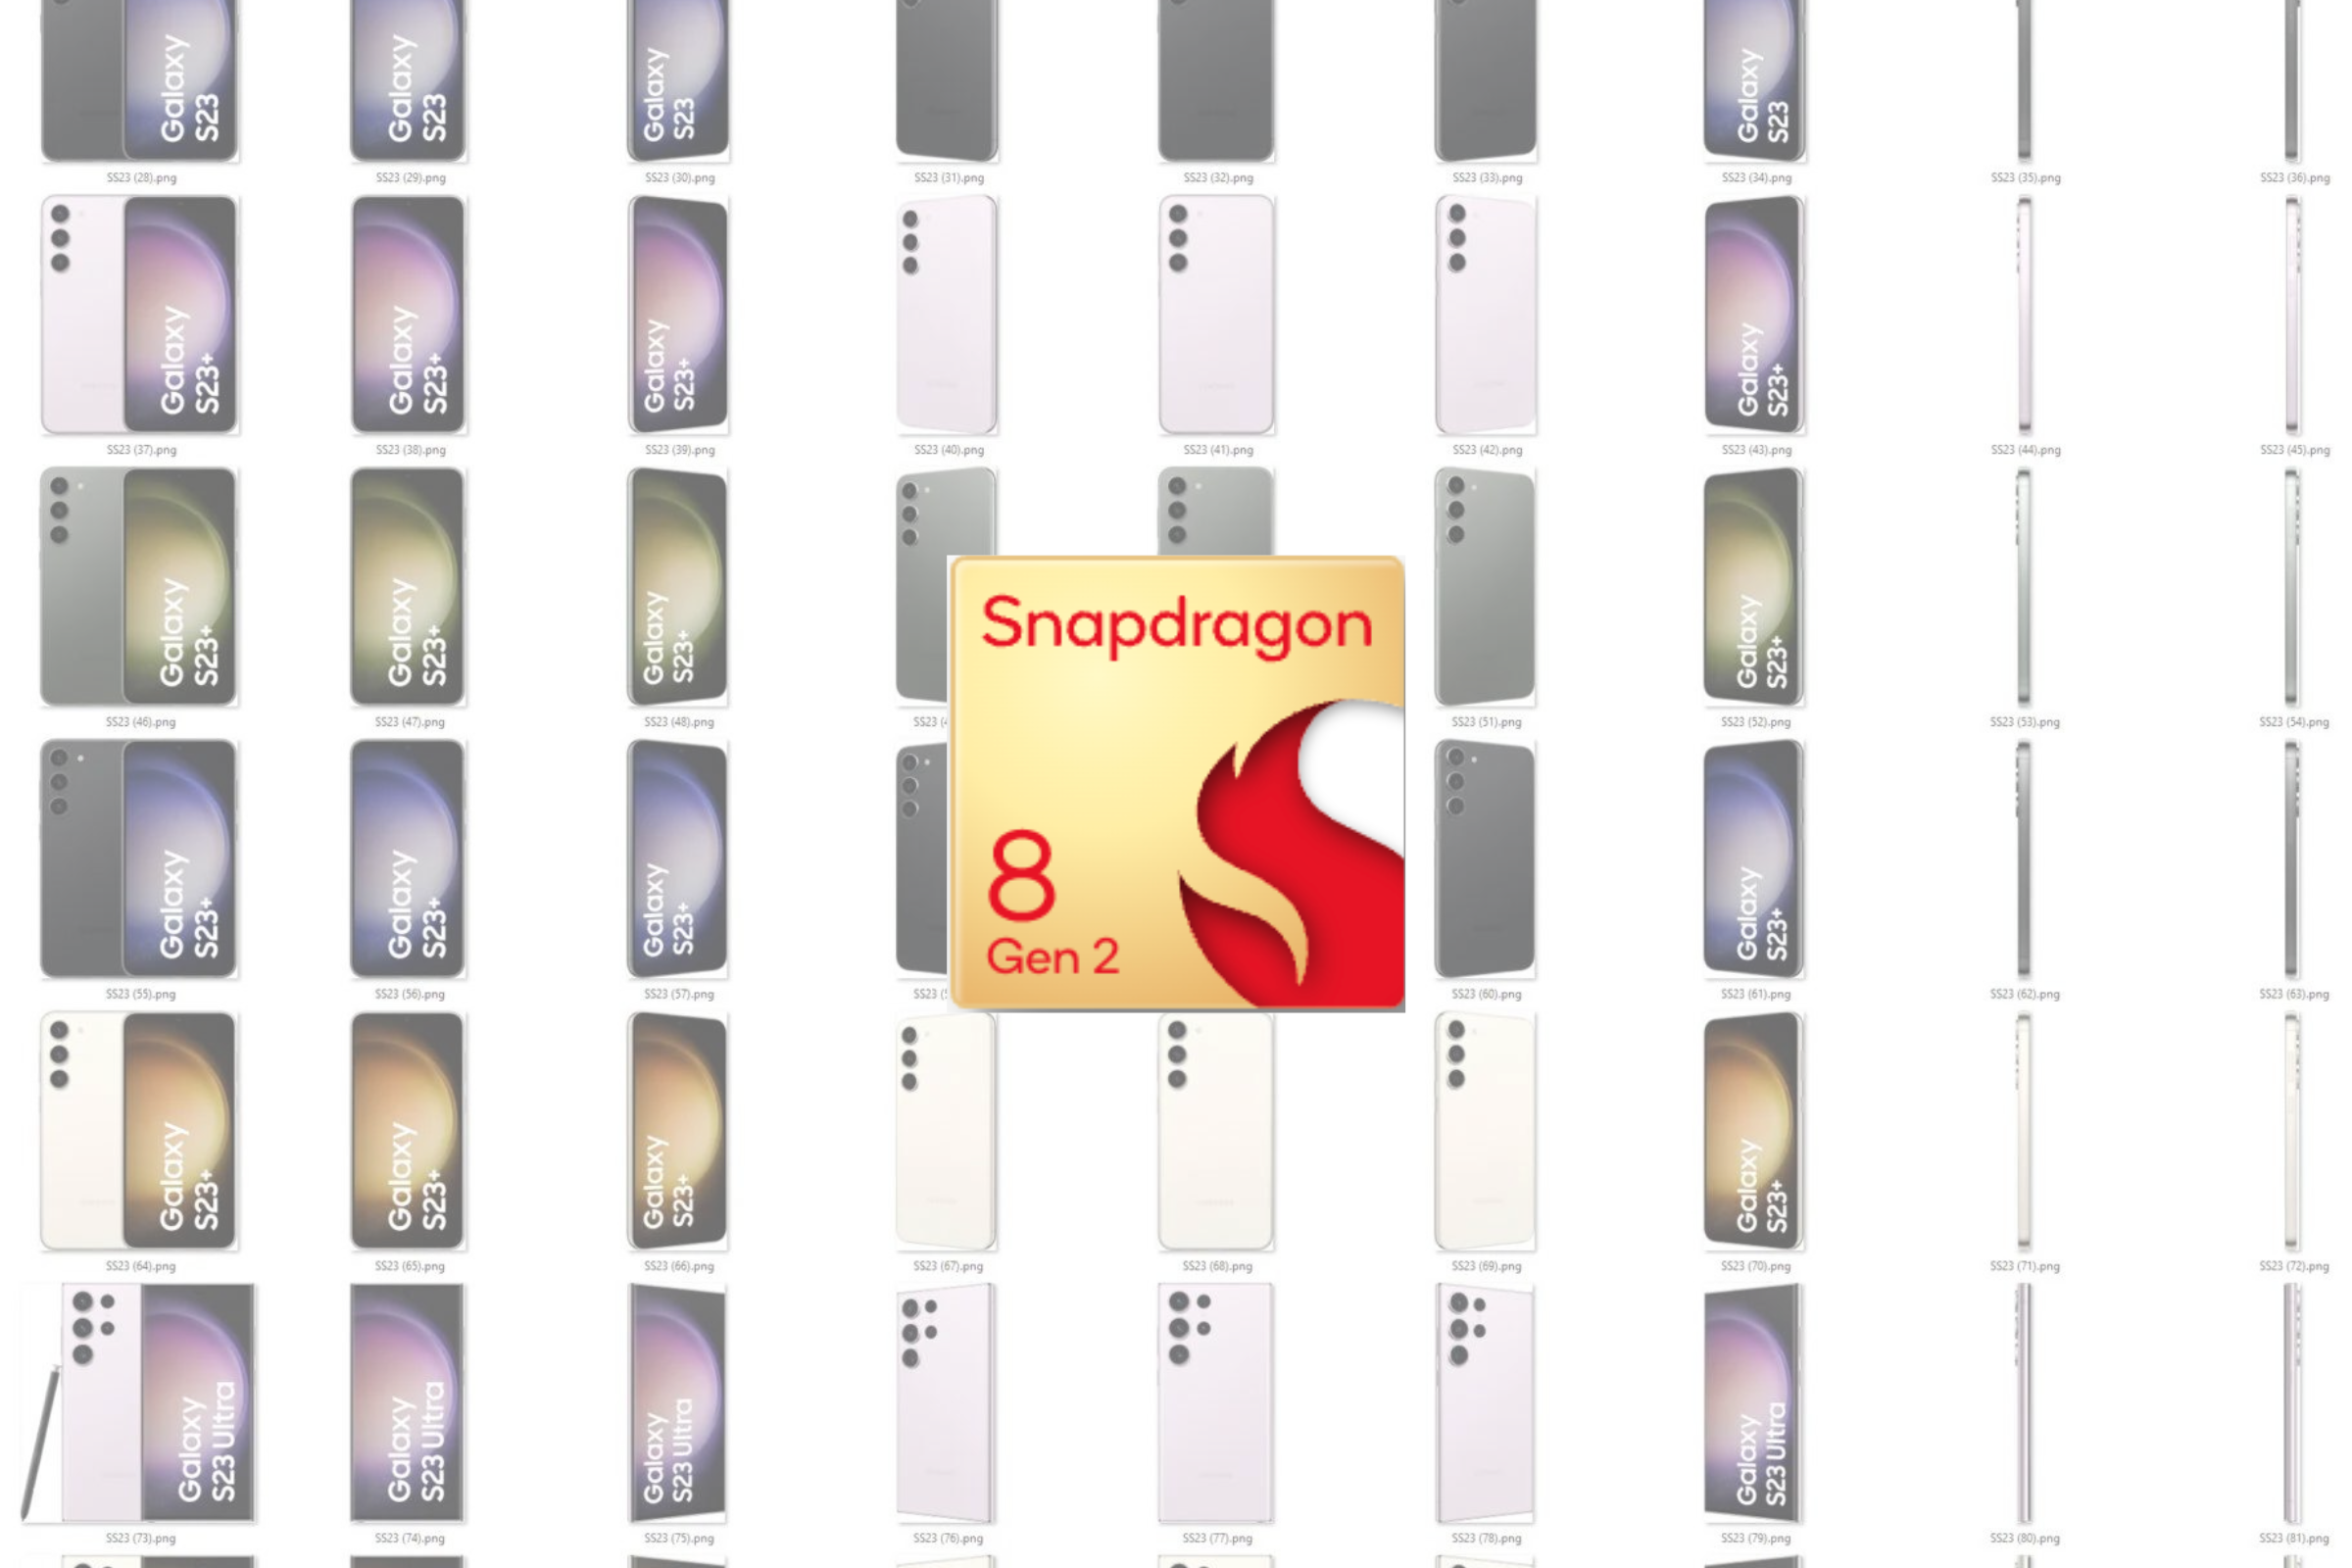 Samsung Galaxy S23 series will reportedly pack a modified Snapdragon 8 Gen 2 chipset